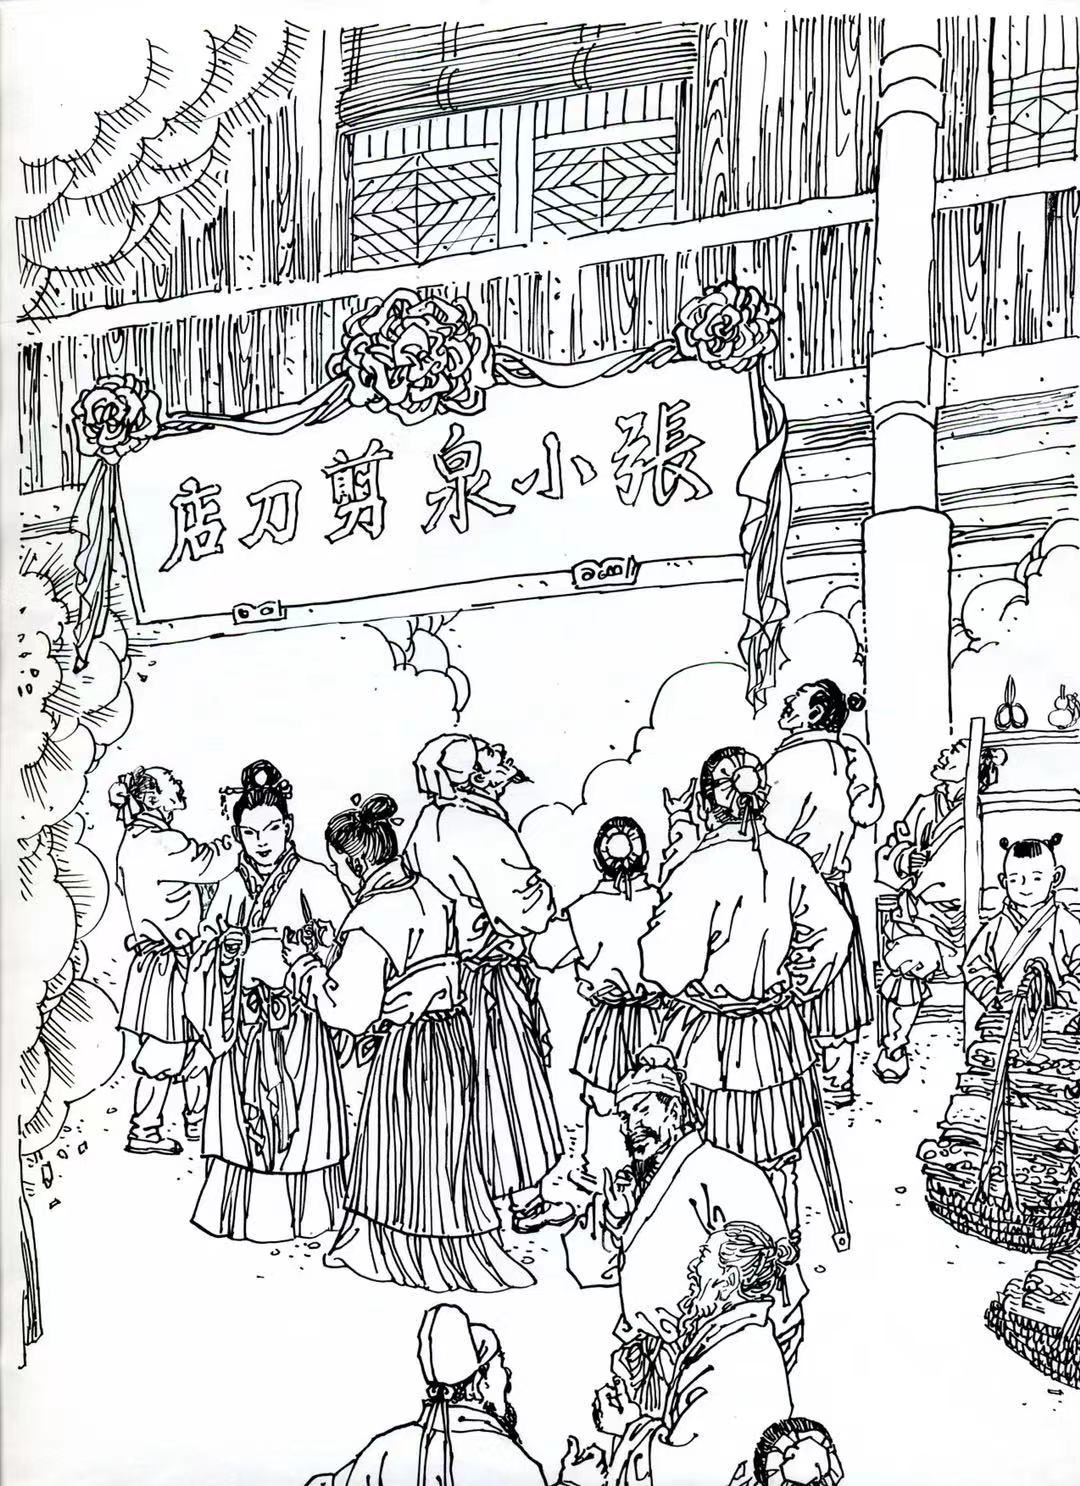 around 1610, "Zhang Dalong" moved to Dajing Lane in Hangzhou. In order to avoid counterfeiting, Zhang Xiaoquan resolutely changed "Zhang Dalong" to his own name "Zhang Xiaoquan" on the day when he took over the business from his father in 1628.